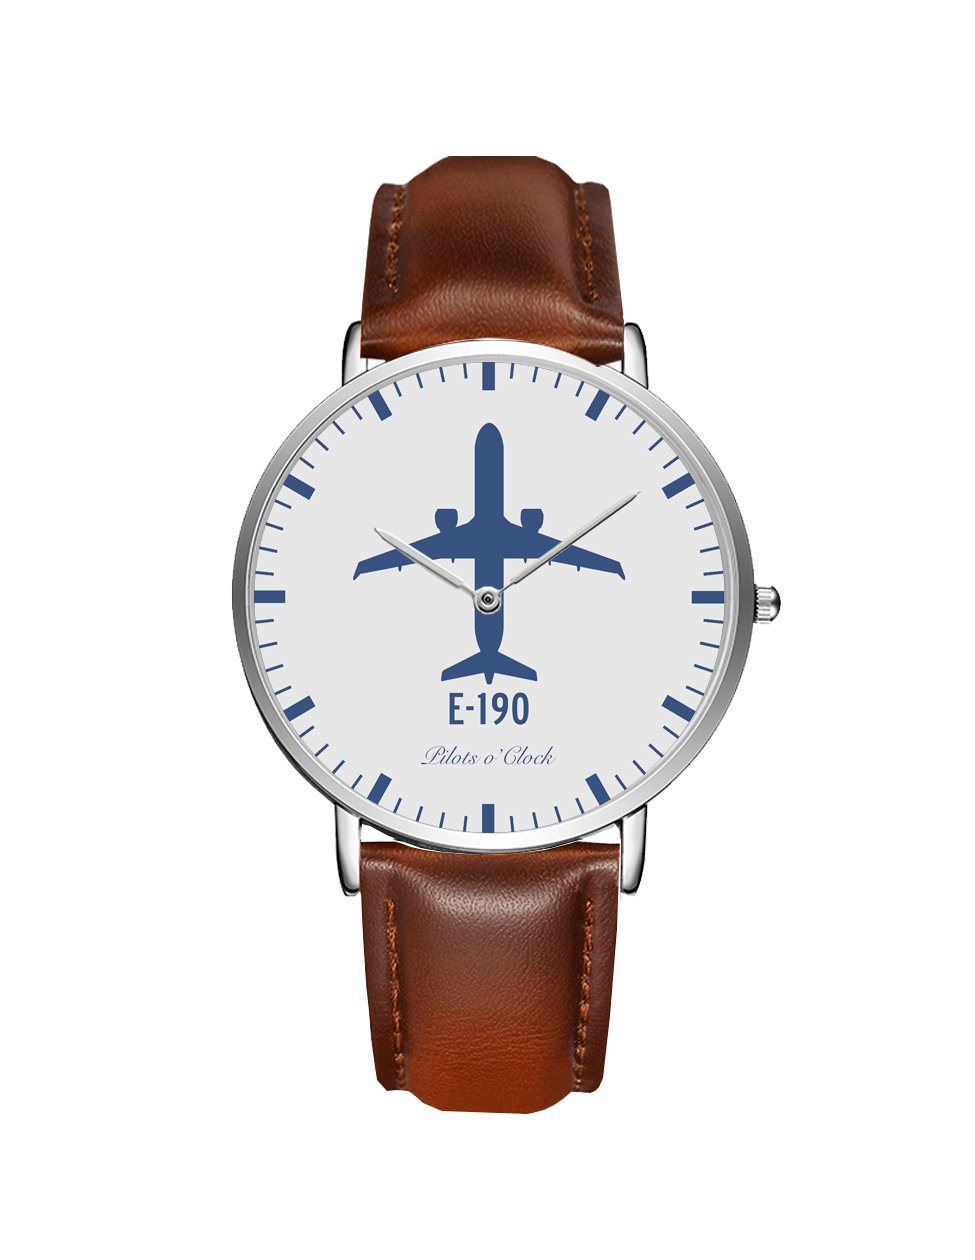 Embraer E190 Leather Strap Watches Pilot Eyes Store Silver & Brown Leather Strap 